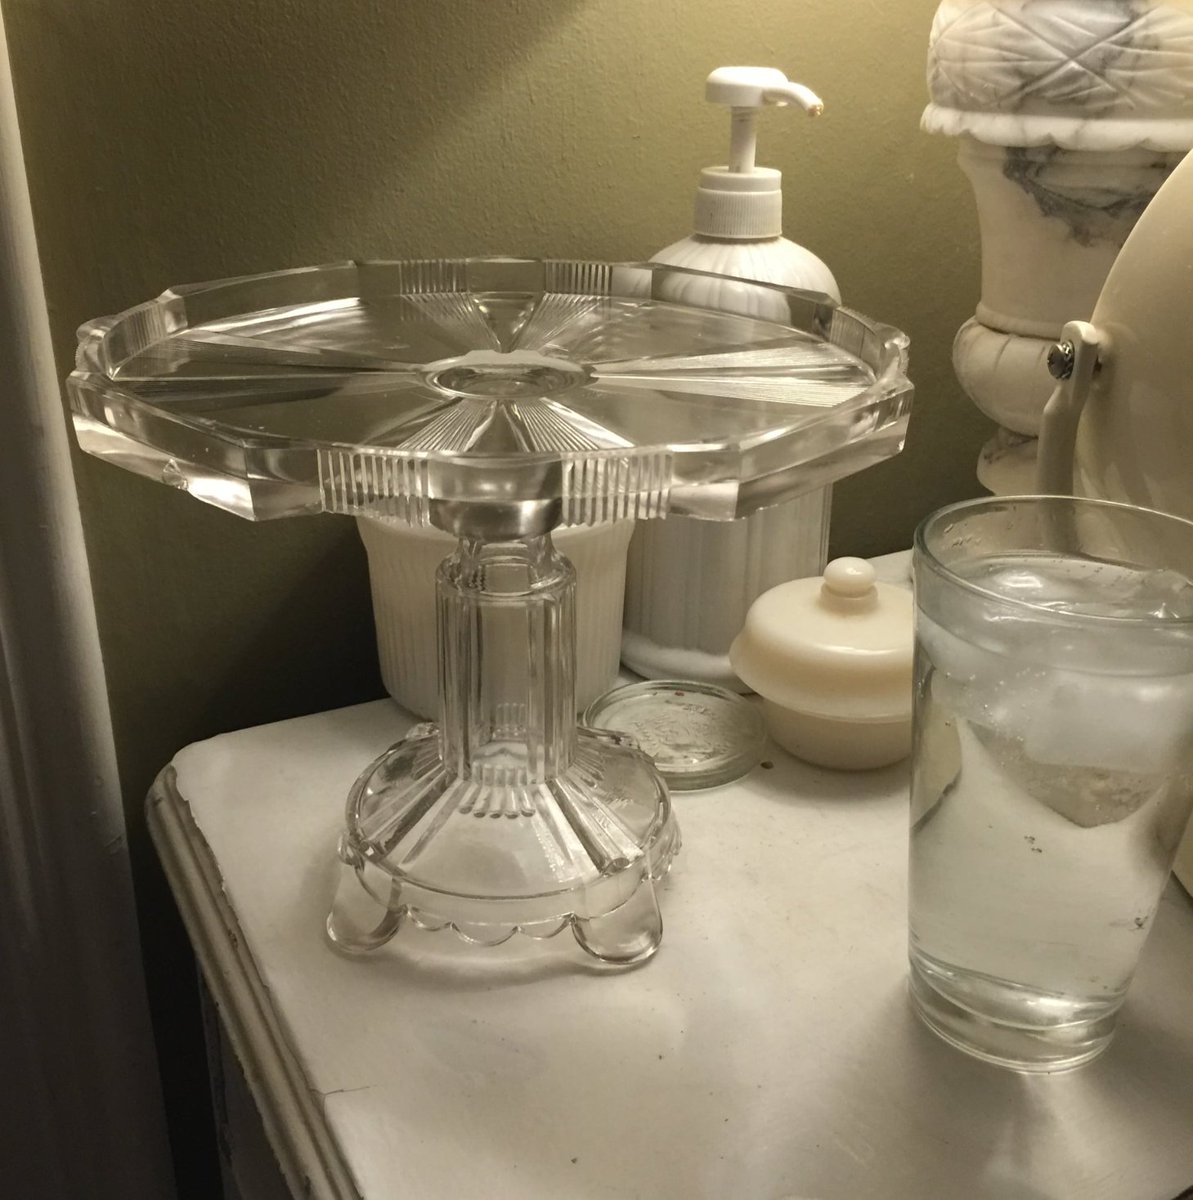 Got a great deal at my little church thrift shop today. A $3 1940 huge milk glass cake stand! On etsy someone's asking $97 for it. I collect them, clear glass, milkglass & silver (photo of partial collection) and the one I got for last year for $16, a gorgeous 1890s glass beauty.